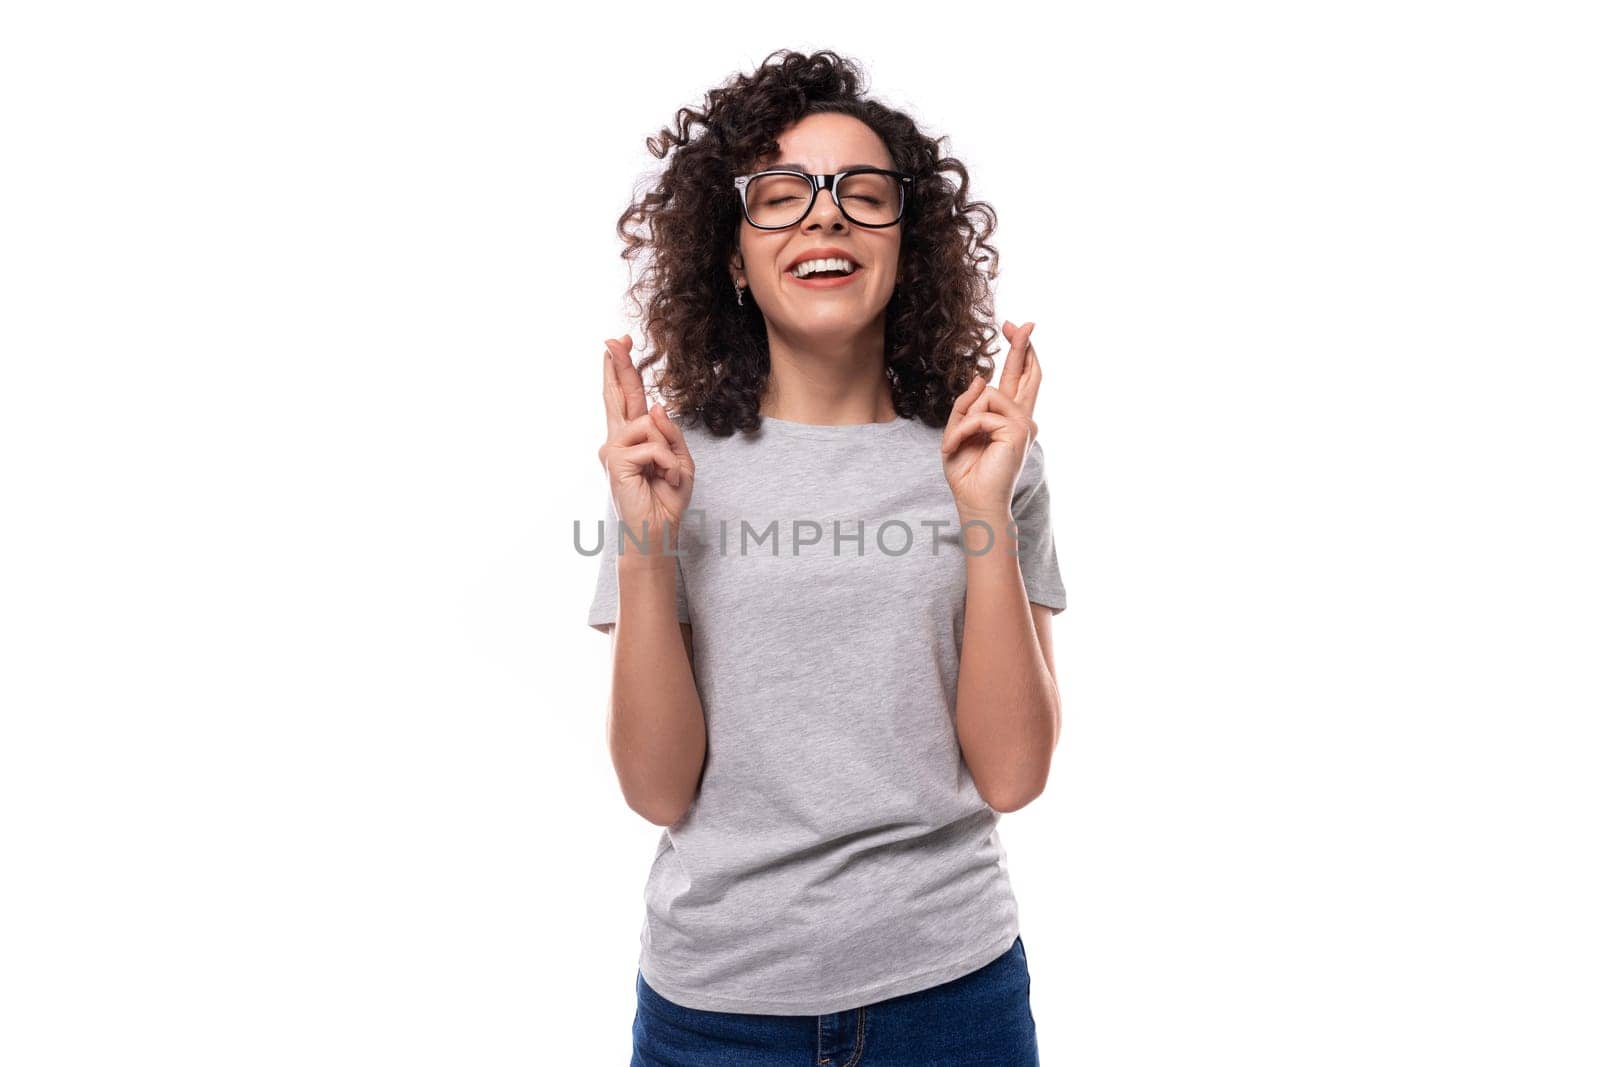 hopeful curly brunette promoter woman with glasses wearing a gray t-shirt crossed her fingers.